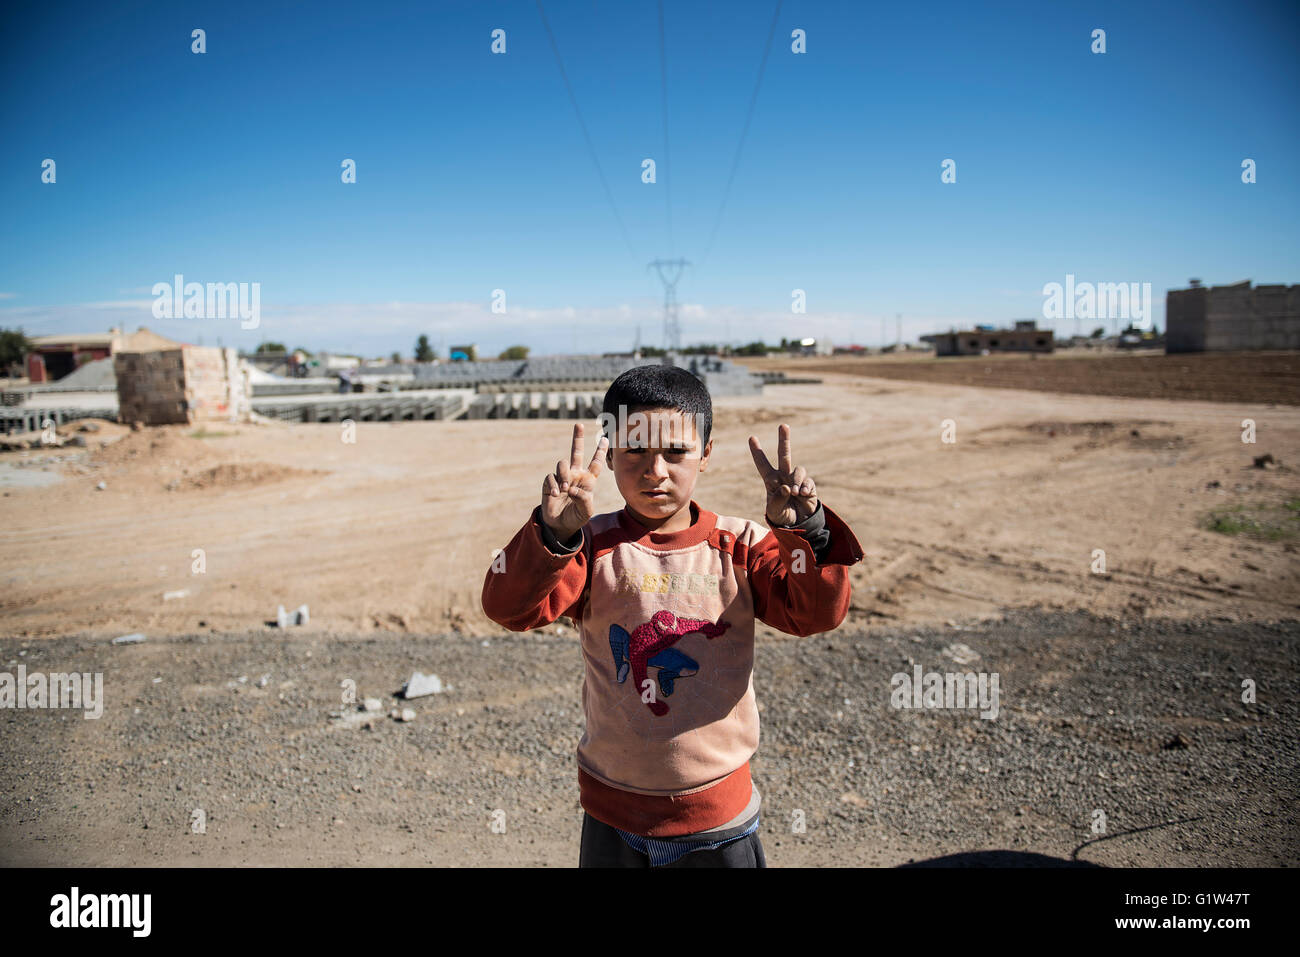 A Kurdish boy from Kobani does the victory sign as he poses for a photo, at the Turkish town of Suruc, near the Turkish-Syrian border. Thousands of Kurdish people were forced to abandon the Syrian town of Kobani, which is under siege by Islamic State forces. Most of them are living in refugee camps in the Turkish town of Suruc. Stock Photo